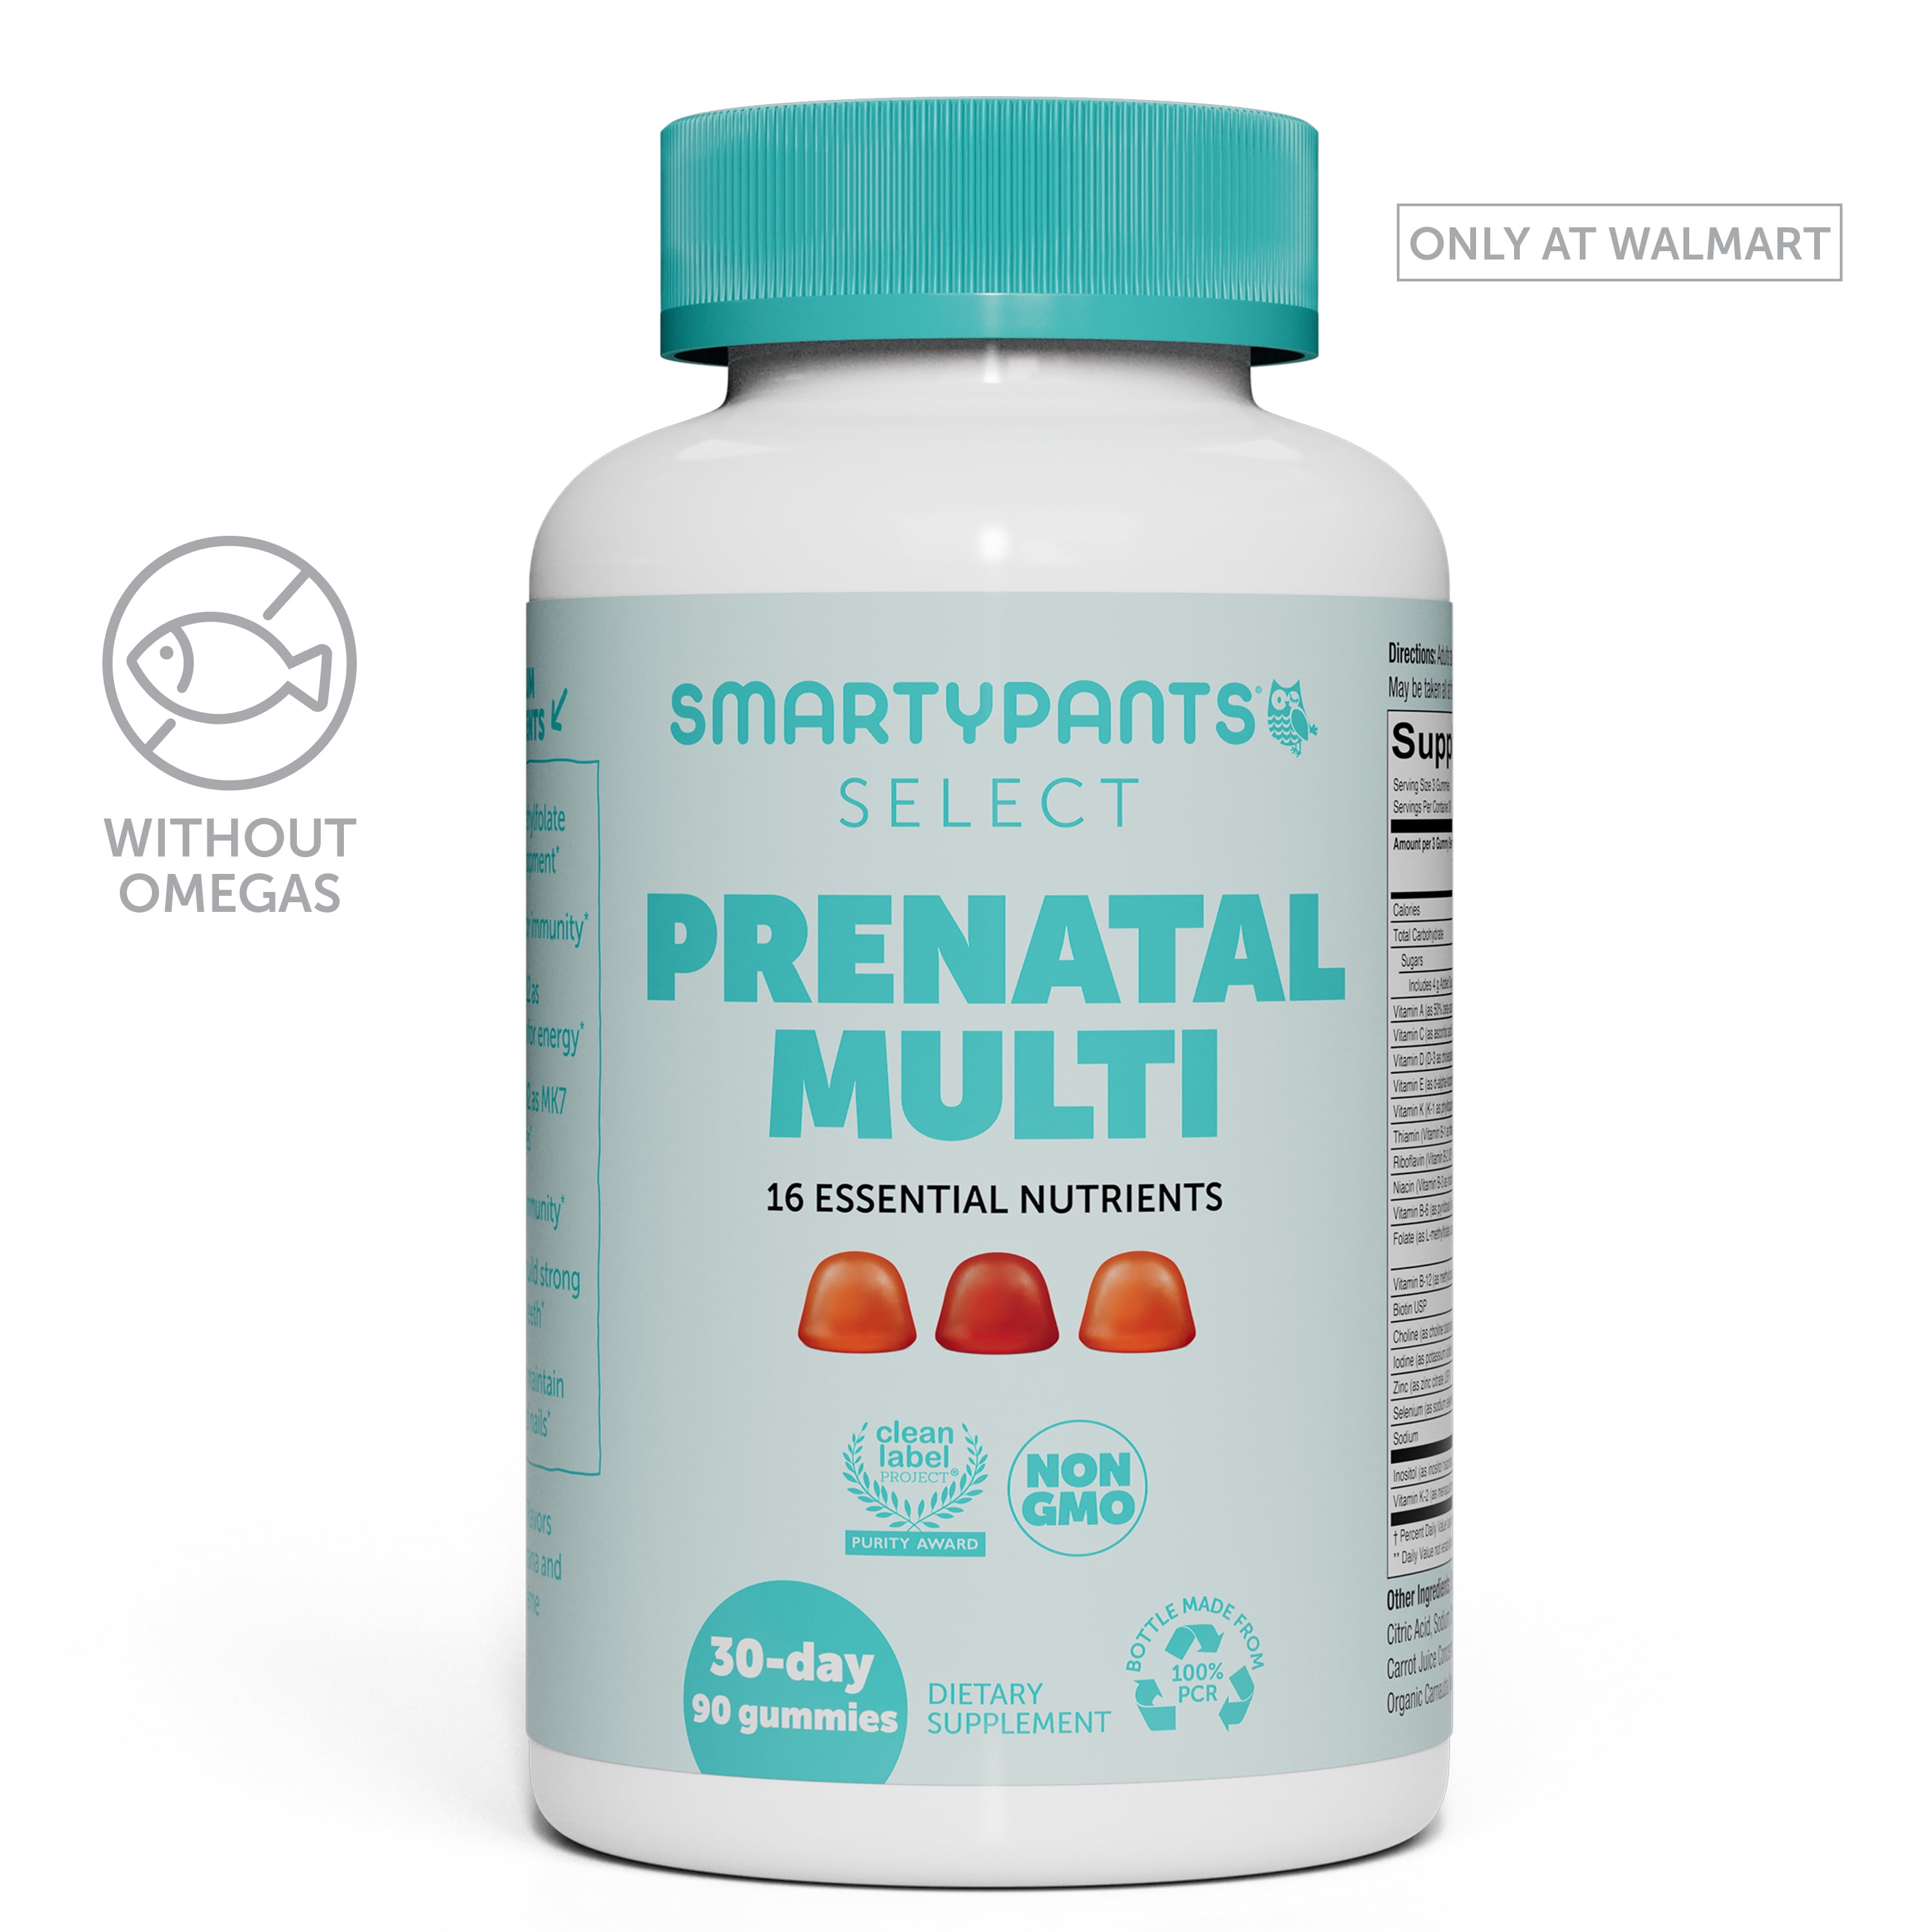 SmartyPants Gummy Vitamins Select Prenatal Multivitamin, 30 Day Supply - ONLY AT WALMART